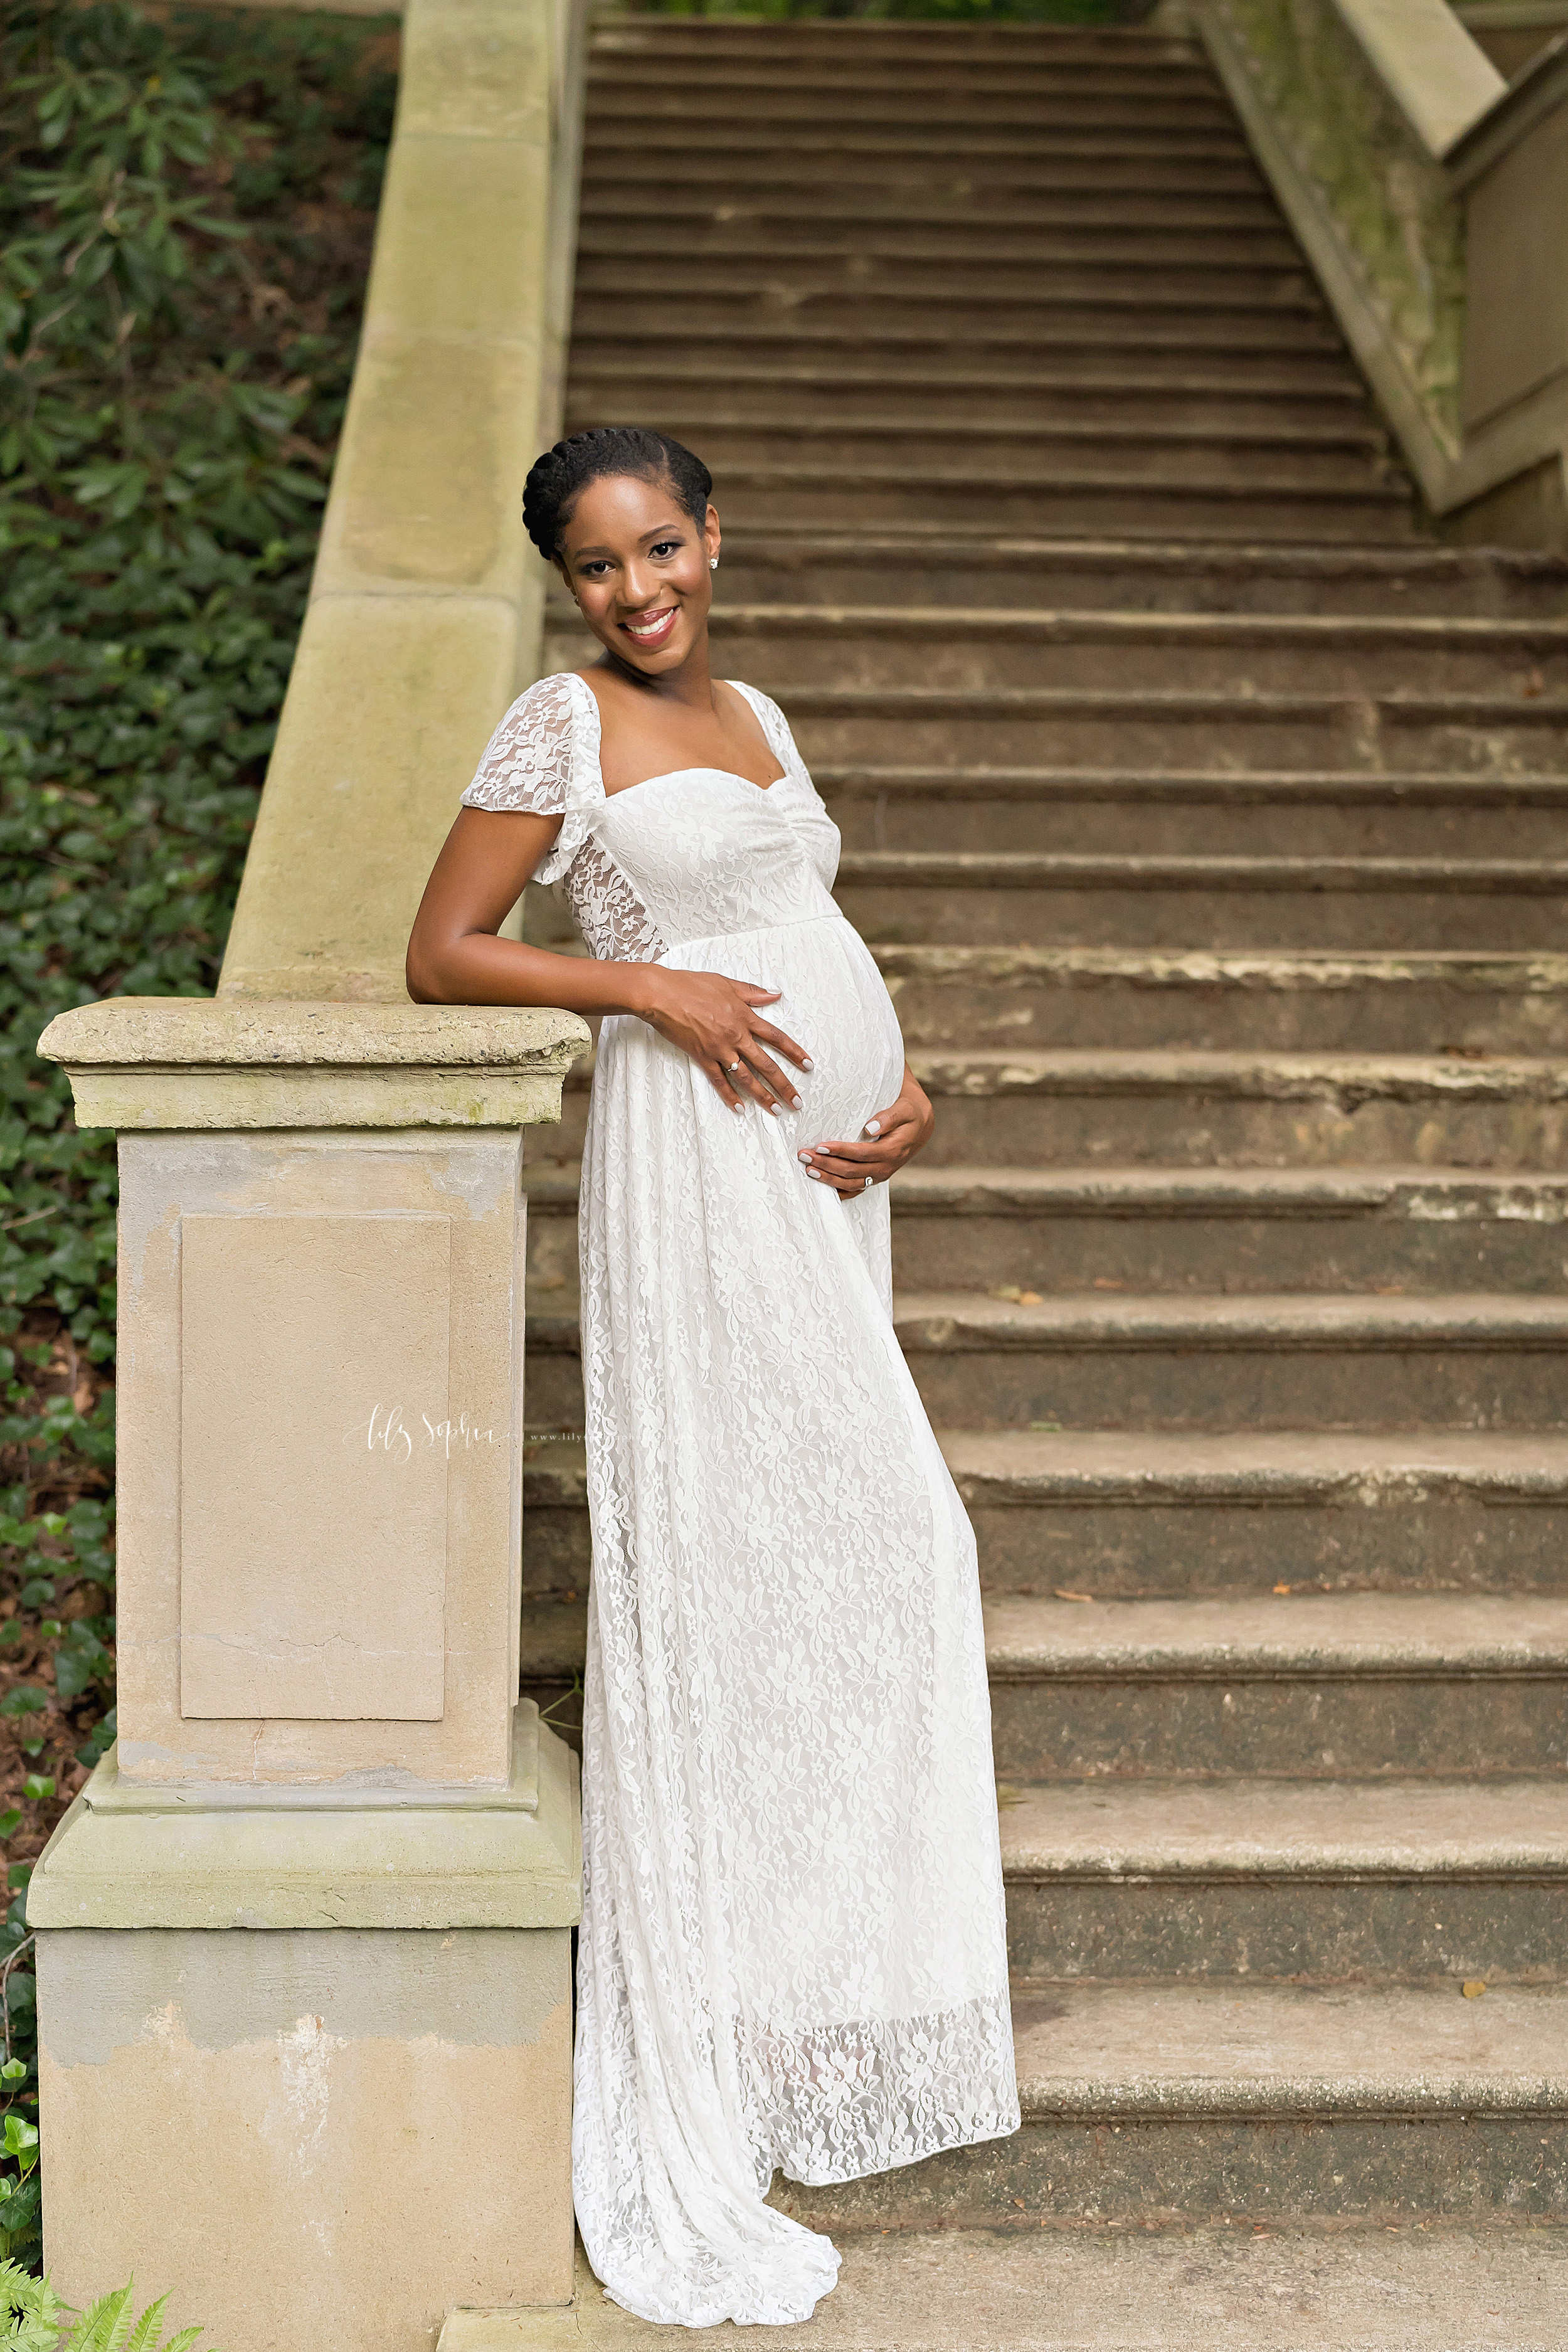  Maternity photo of an African-American woman wearing a lace overlay full-length gown with short bell sleeves as she stands at sunset at the base of a stone staircase and leans with her right elbow on the newel post of the stone bannister in an Atlan